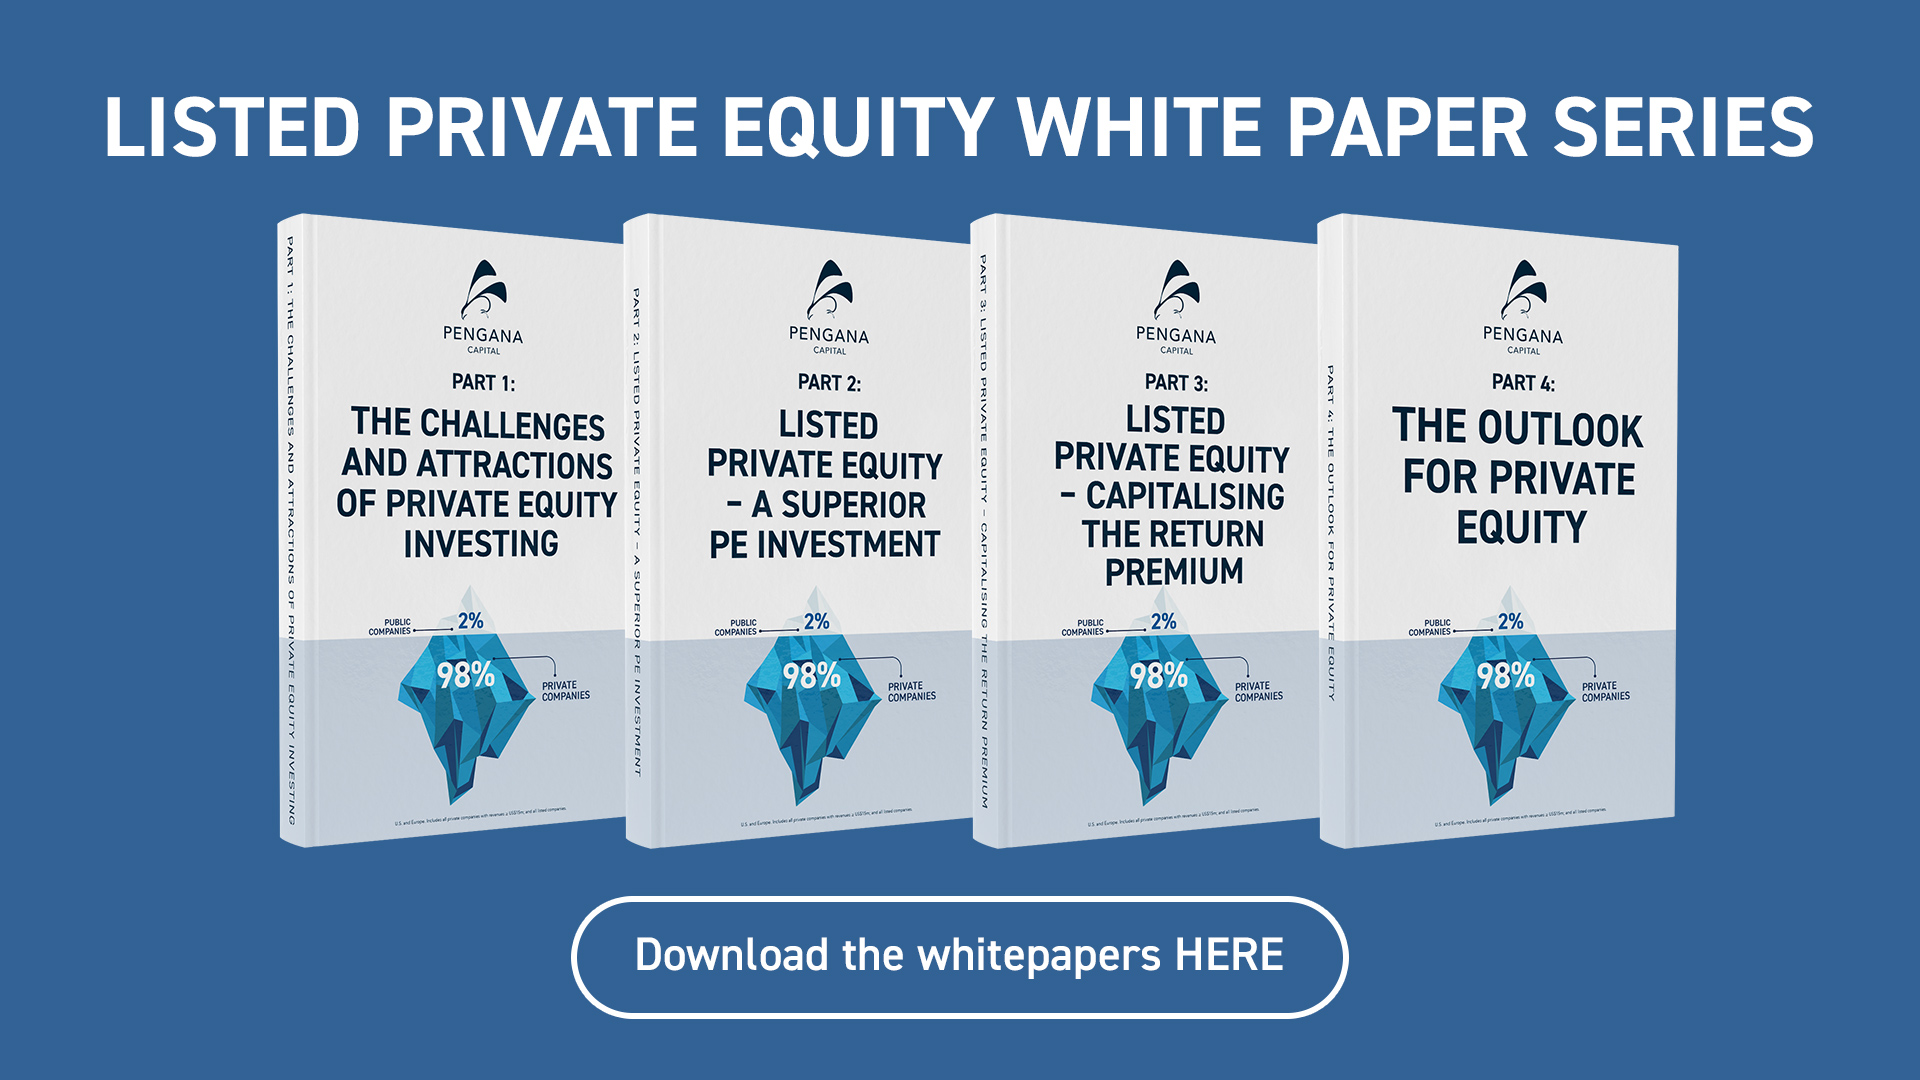 Listed Private Equity White Paper